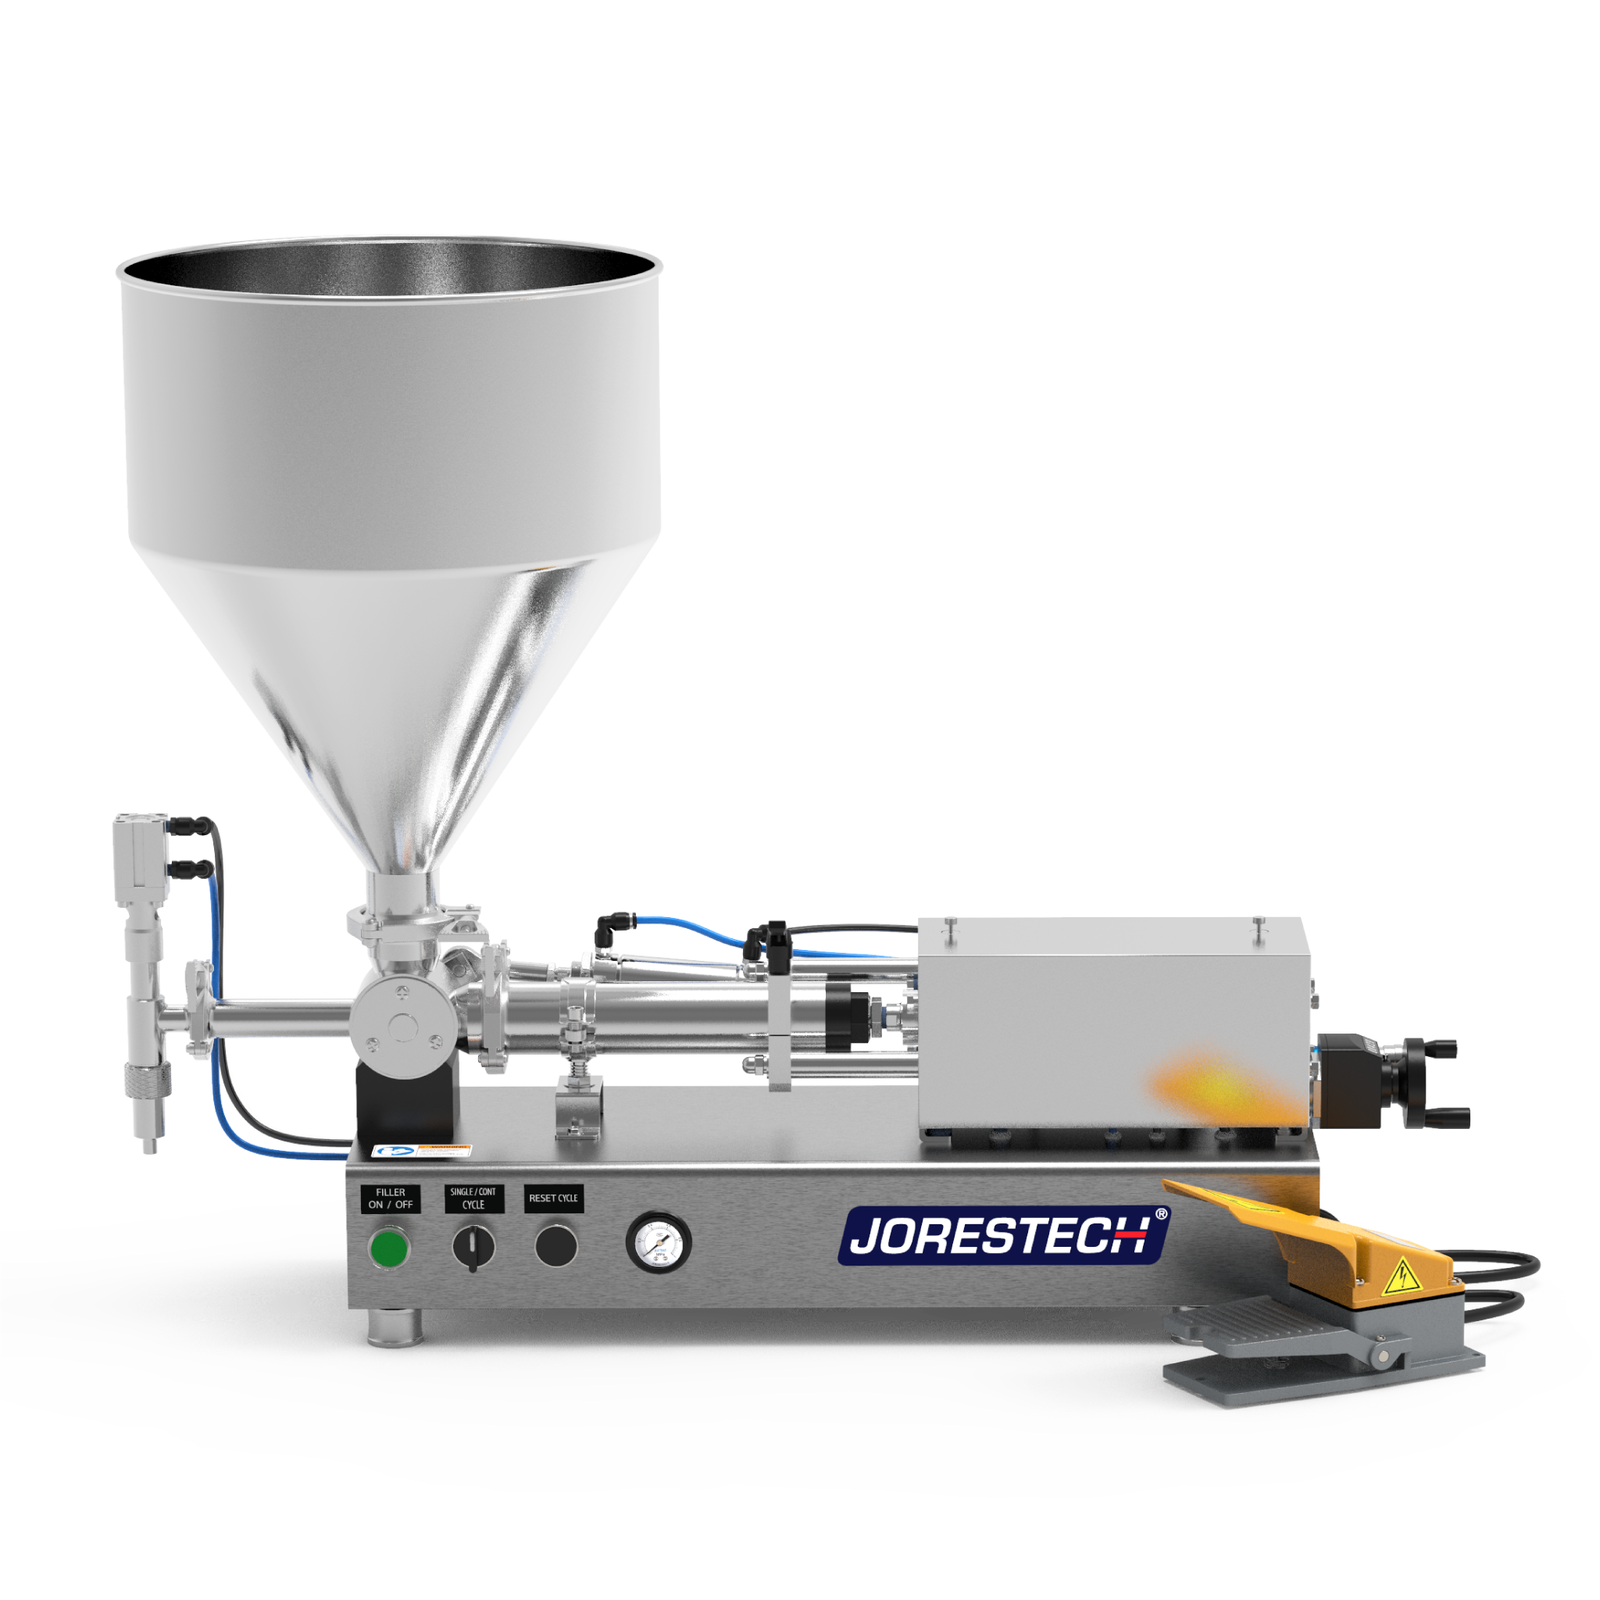 A high viscosity JORES TECHNOLOGIES® paste piston filling machine in a frontal view over white background. The piston filler is made out of stainless steel and there's a yellow and grey foot pedal resting on the side.